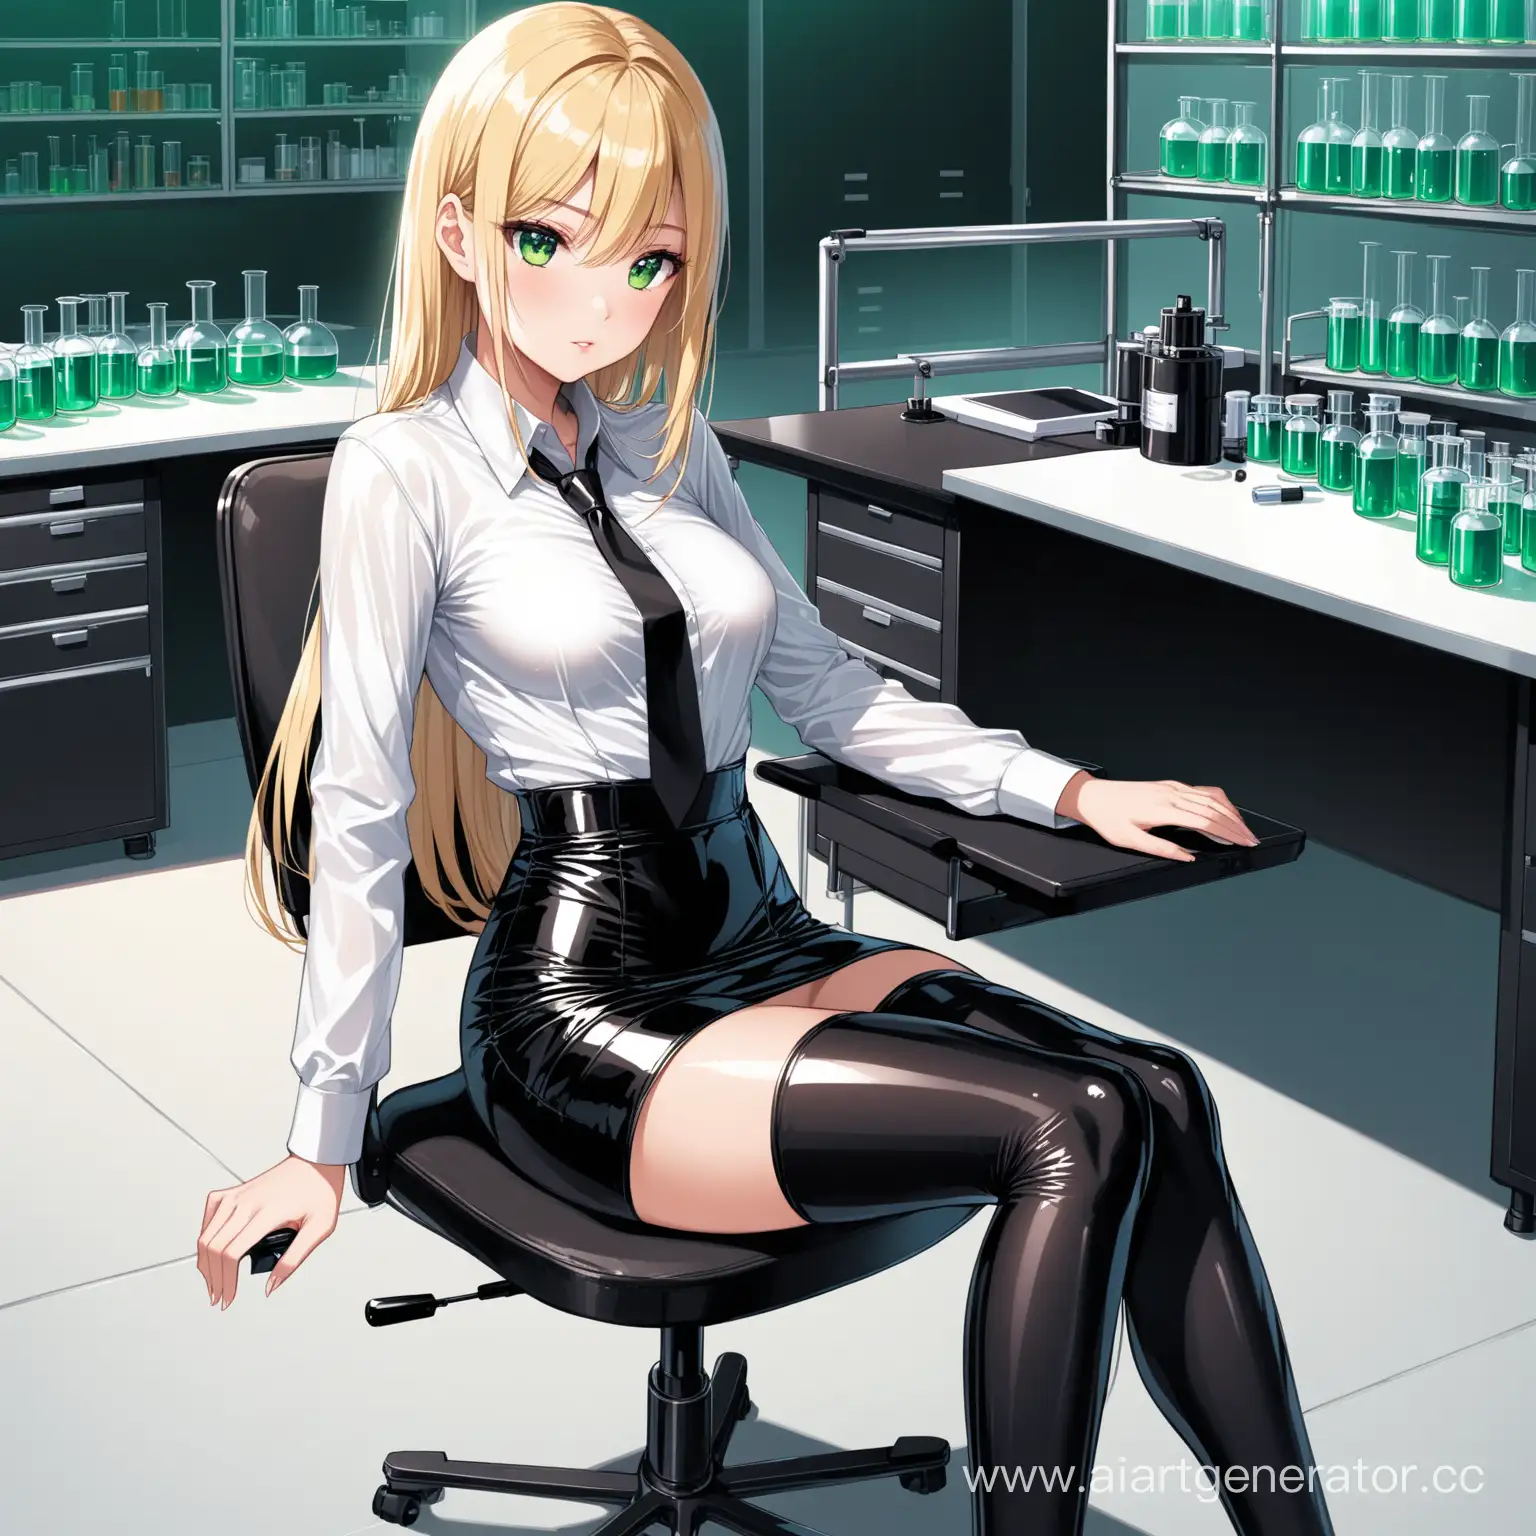 a short girl, long straight blonde hair, green eyes, dressed in a black latex short skirt and a white shirt and black stockings, she is sitting in a laboratory on a chair at a desk, she looks seductive